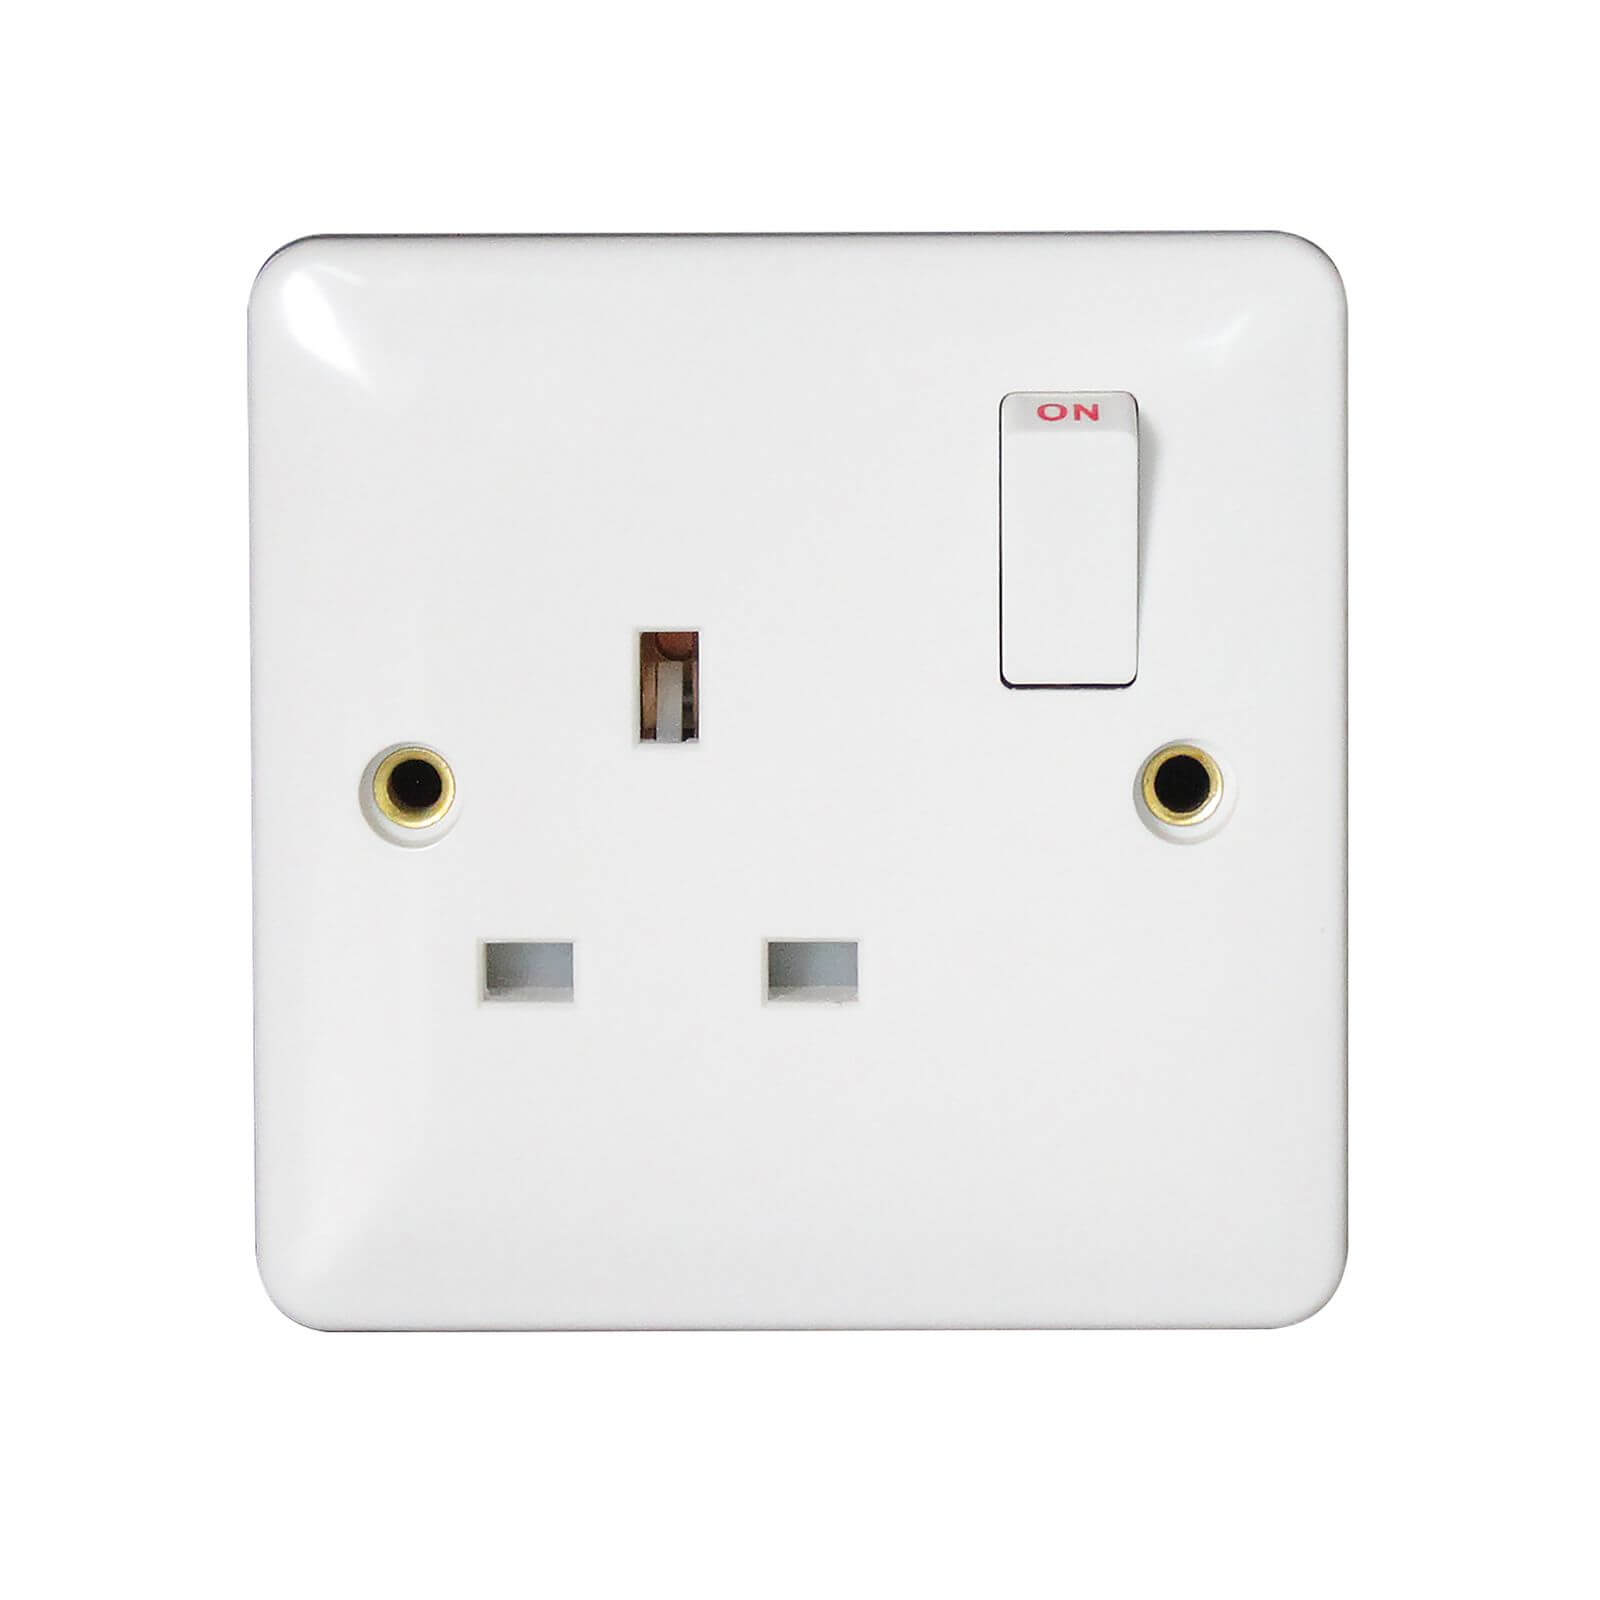 Photo of 1 Gang Switched Single Pole Socket - 13a